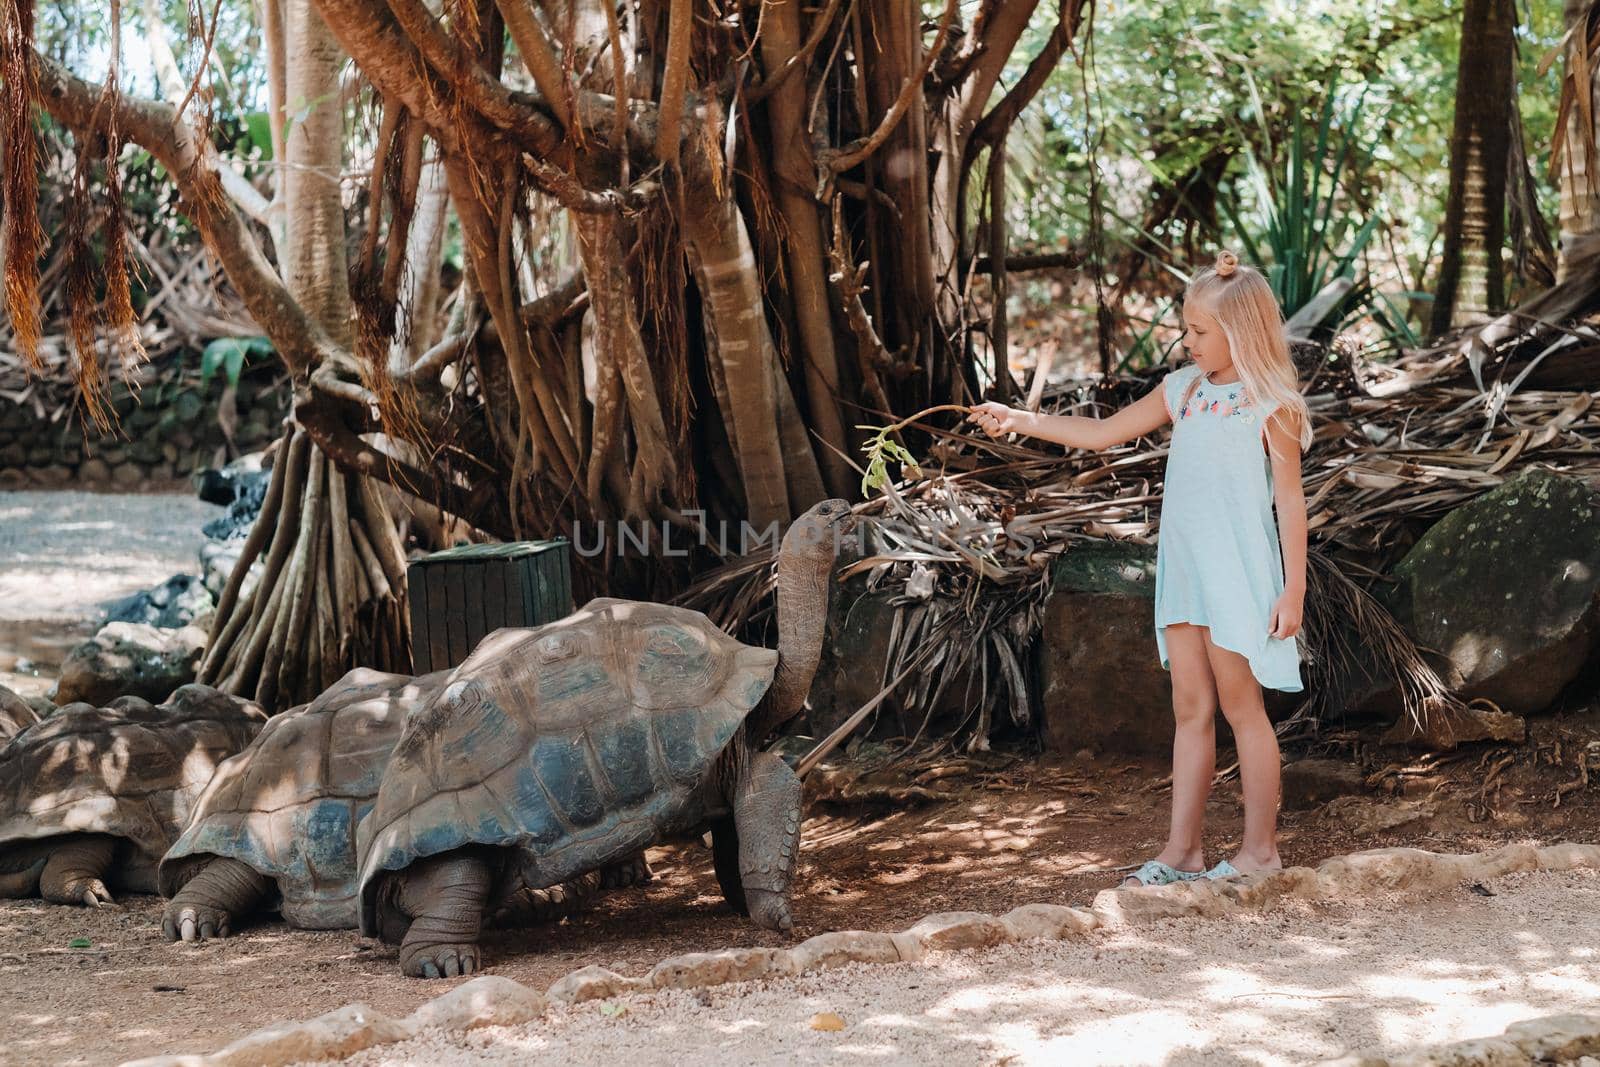 Fun family entertainment in Mauritius. A girl feeds a giant tortoise at the Mauritius island zoo.